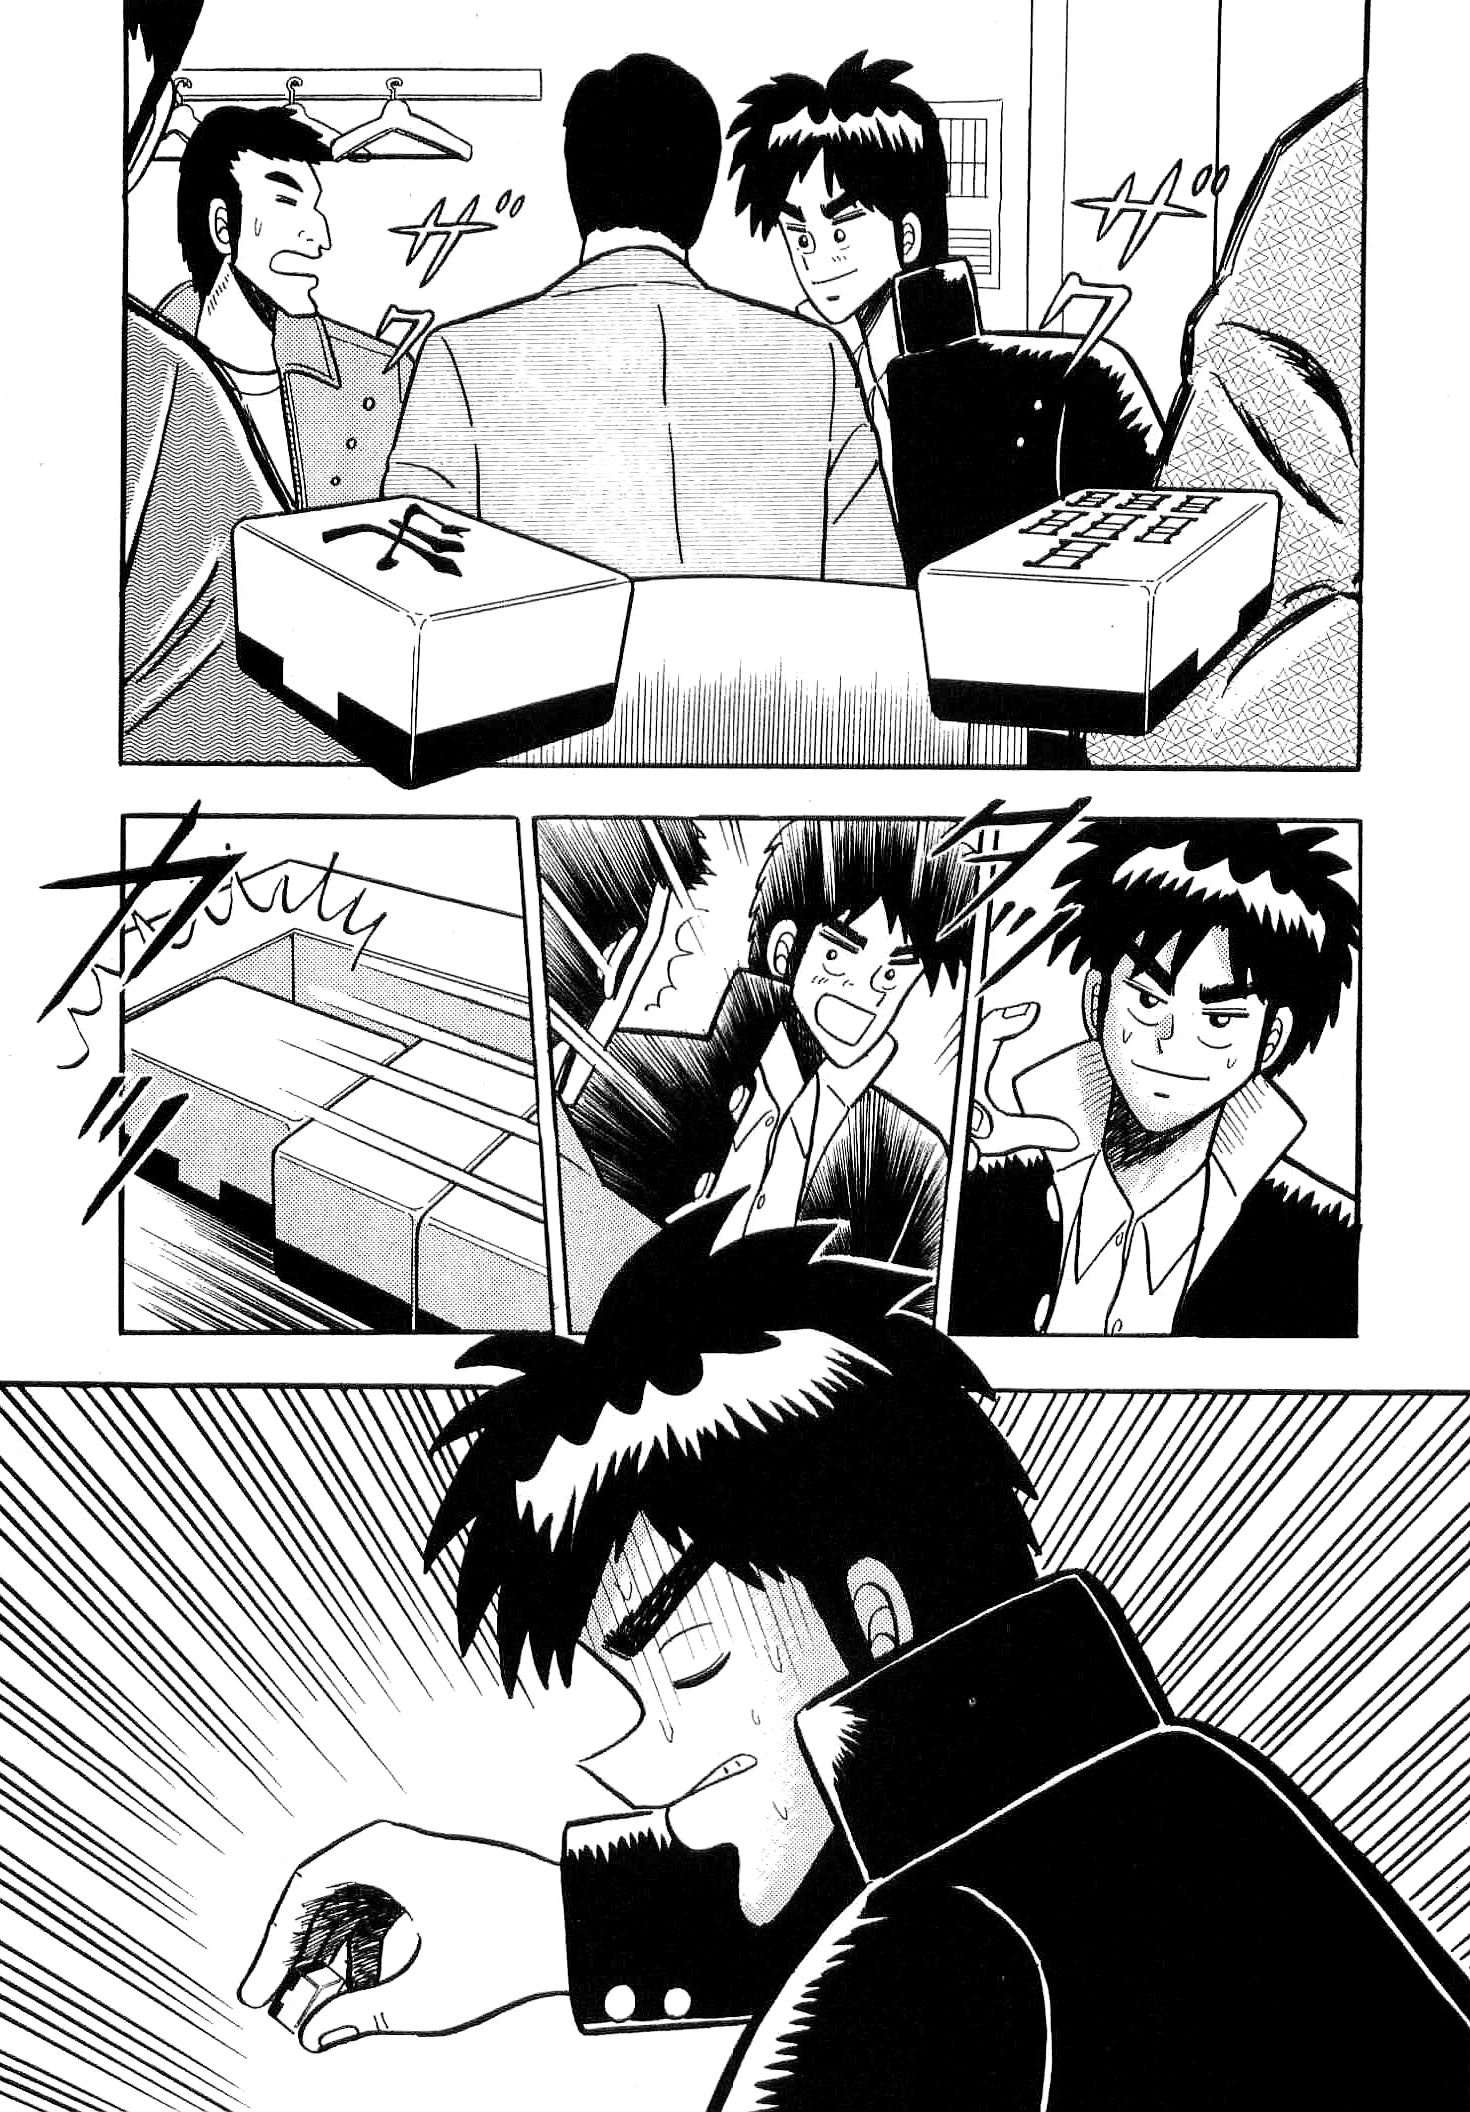 Atsuize Tenma! - Page 2